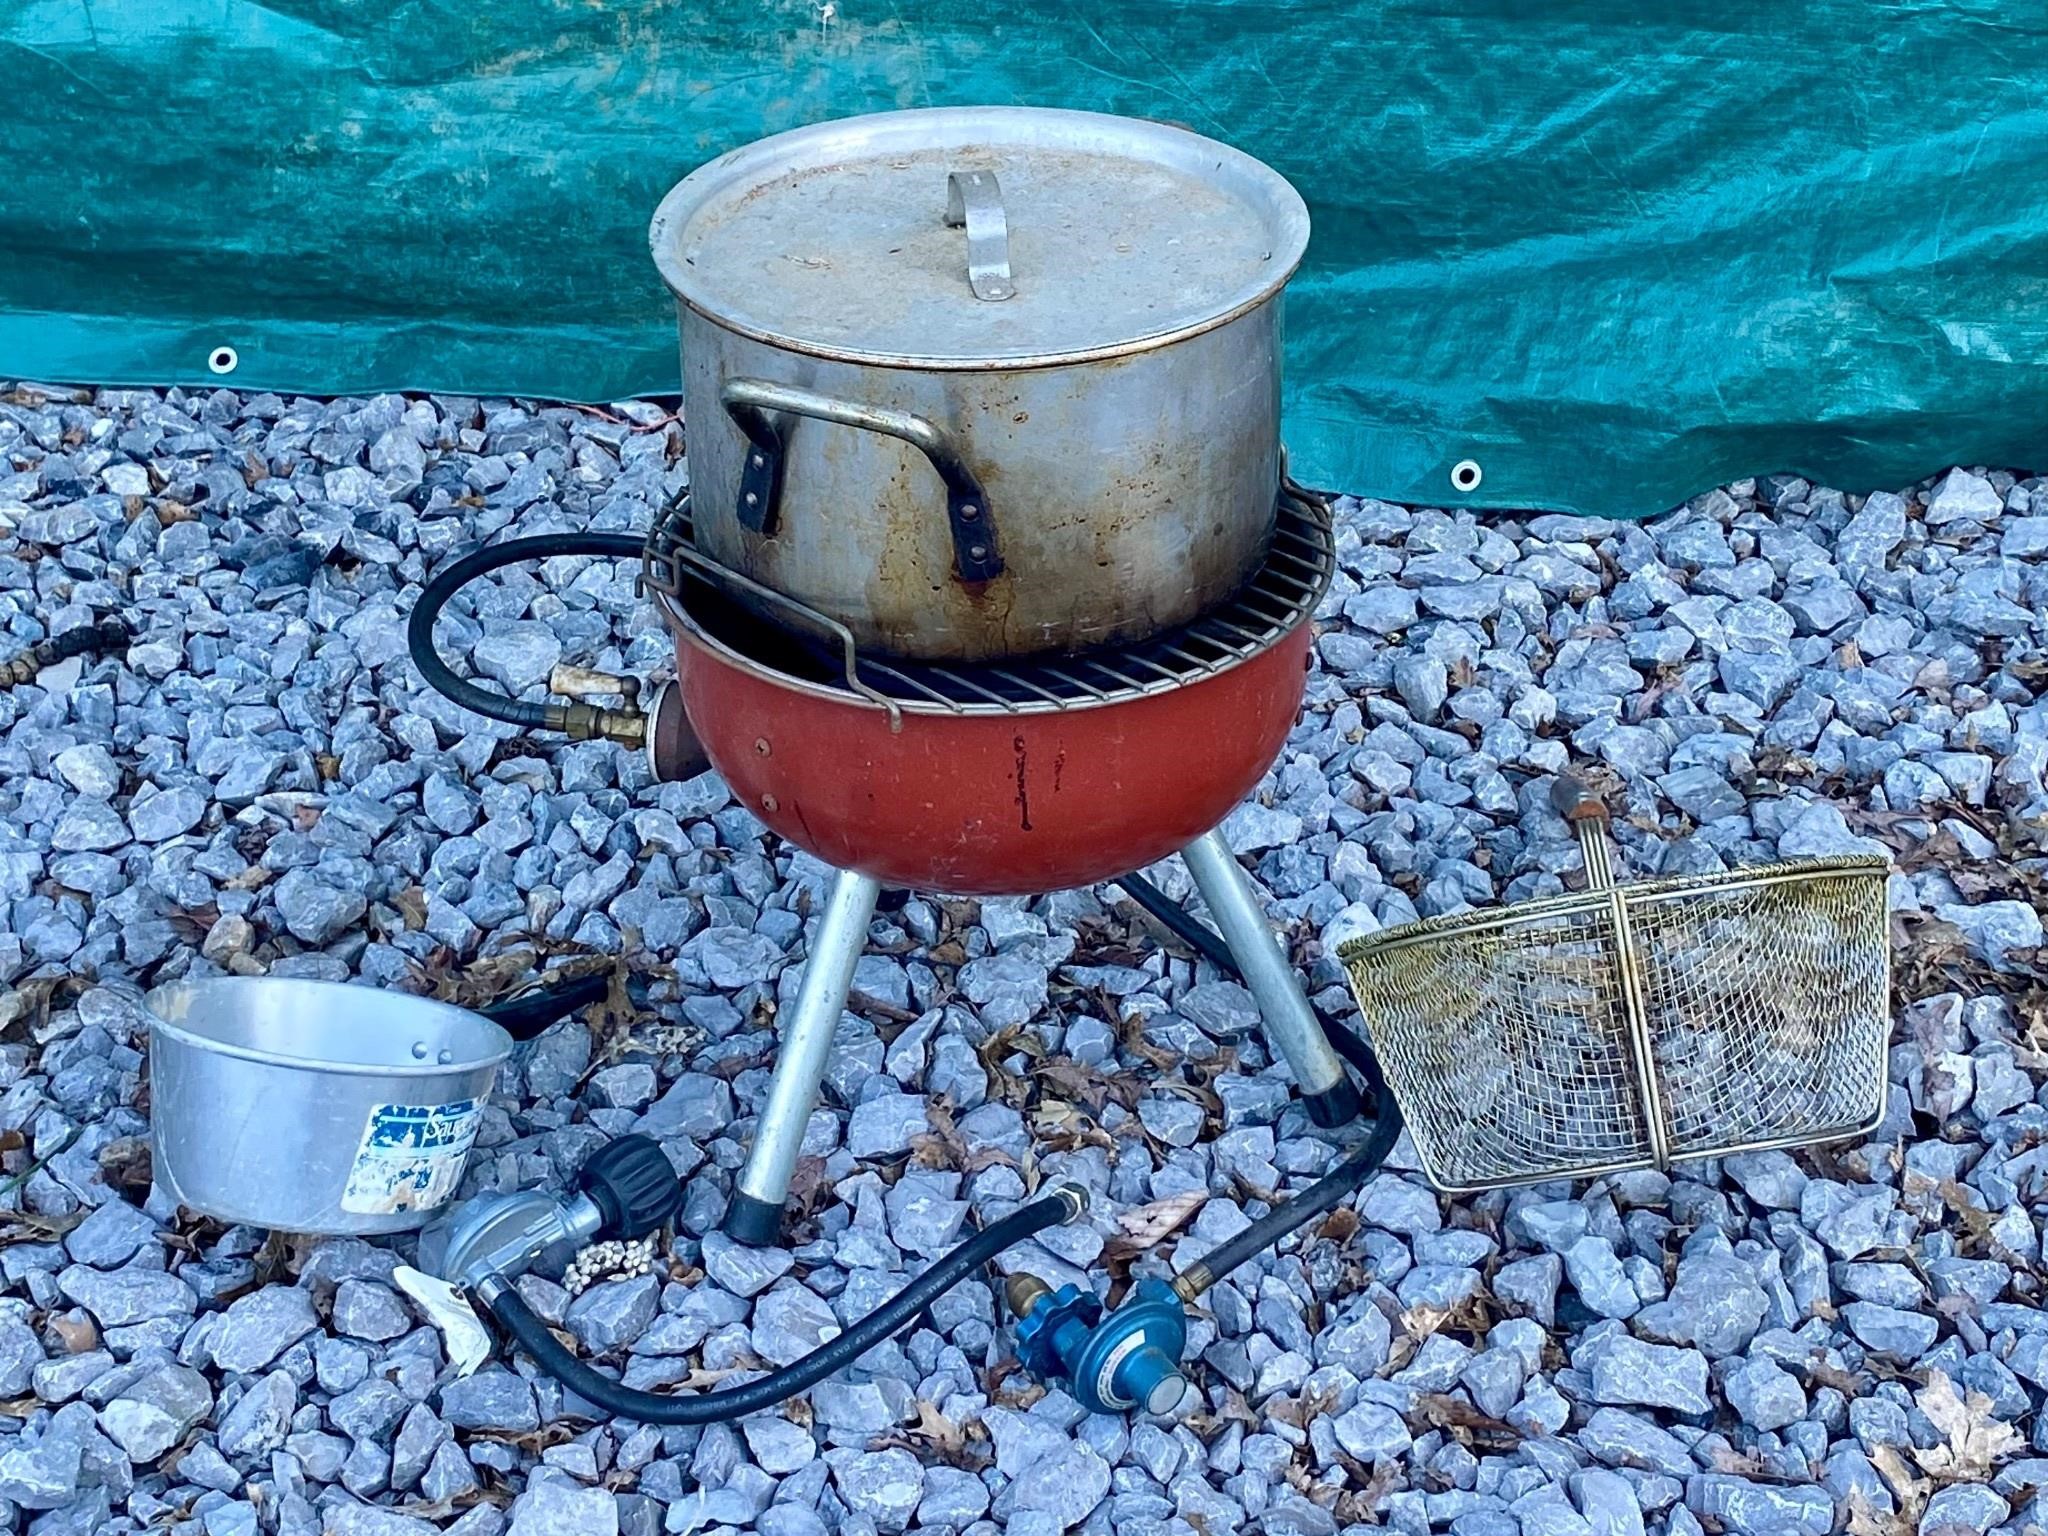 Propane Grill with pots with basket